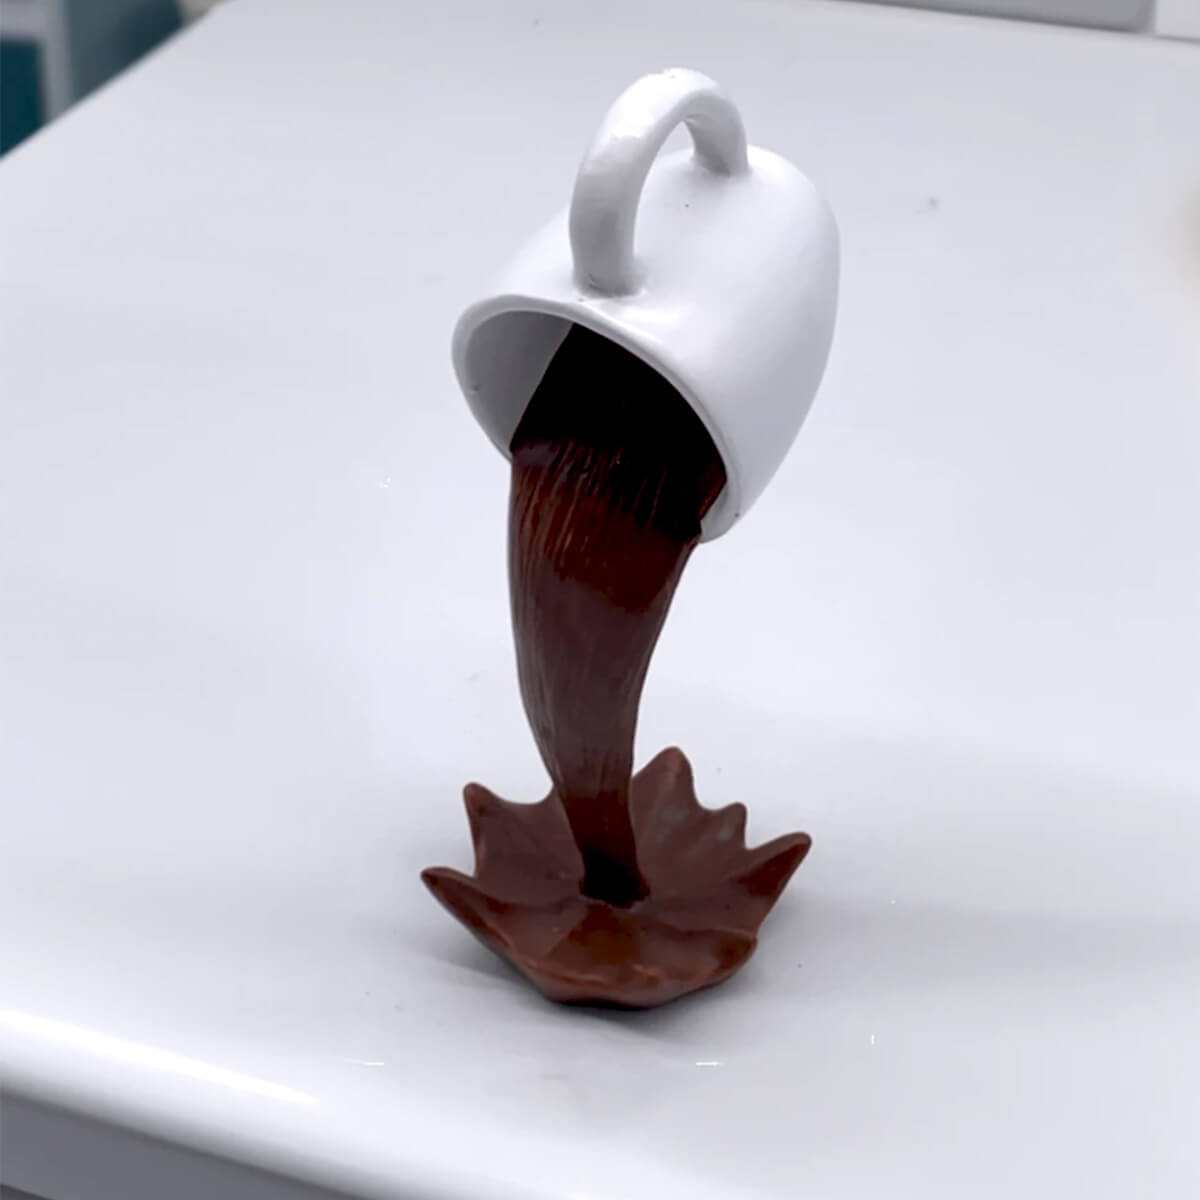 Floating Spilling Coffee Cup